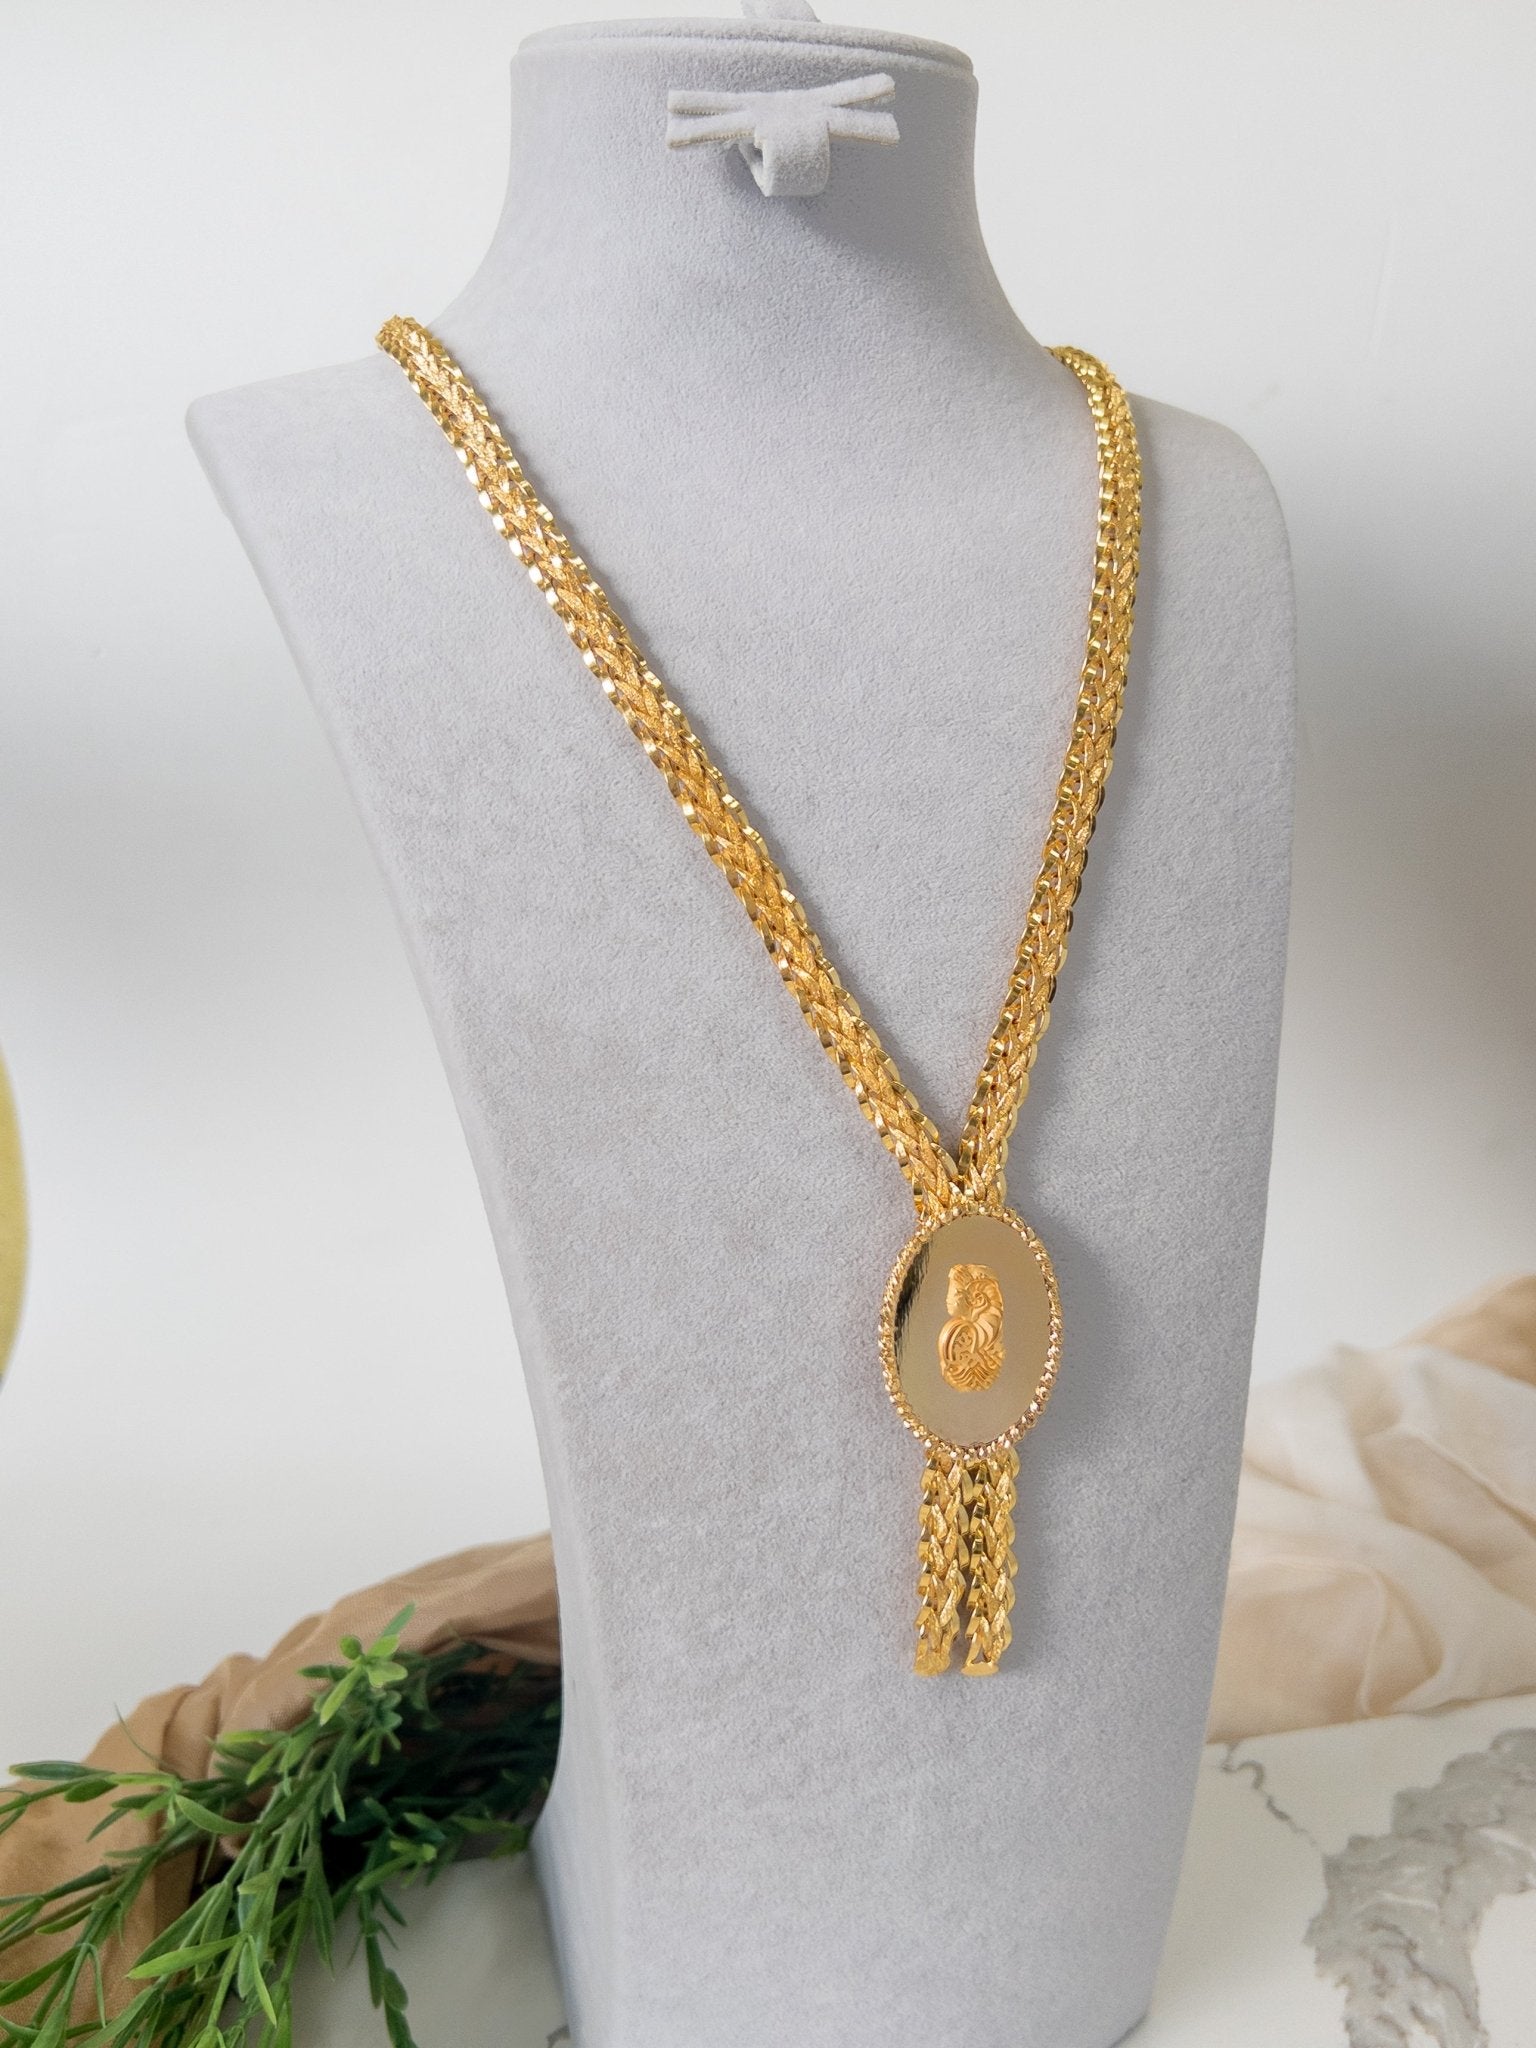 YELLOW GOLD NECKLACE, 21K, Weight:53.6g, YGNECKLACE21K091 - Baladna Jewelry